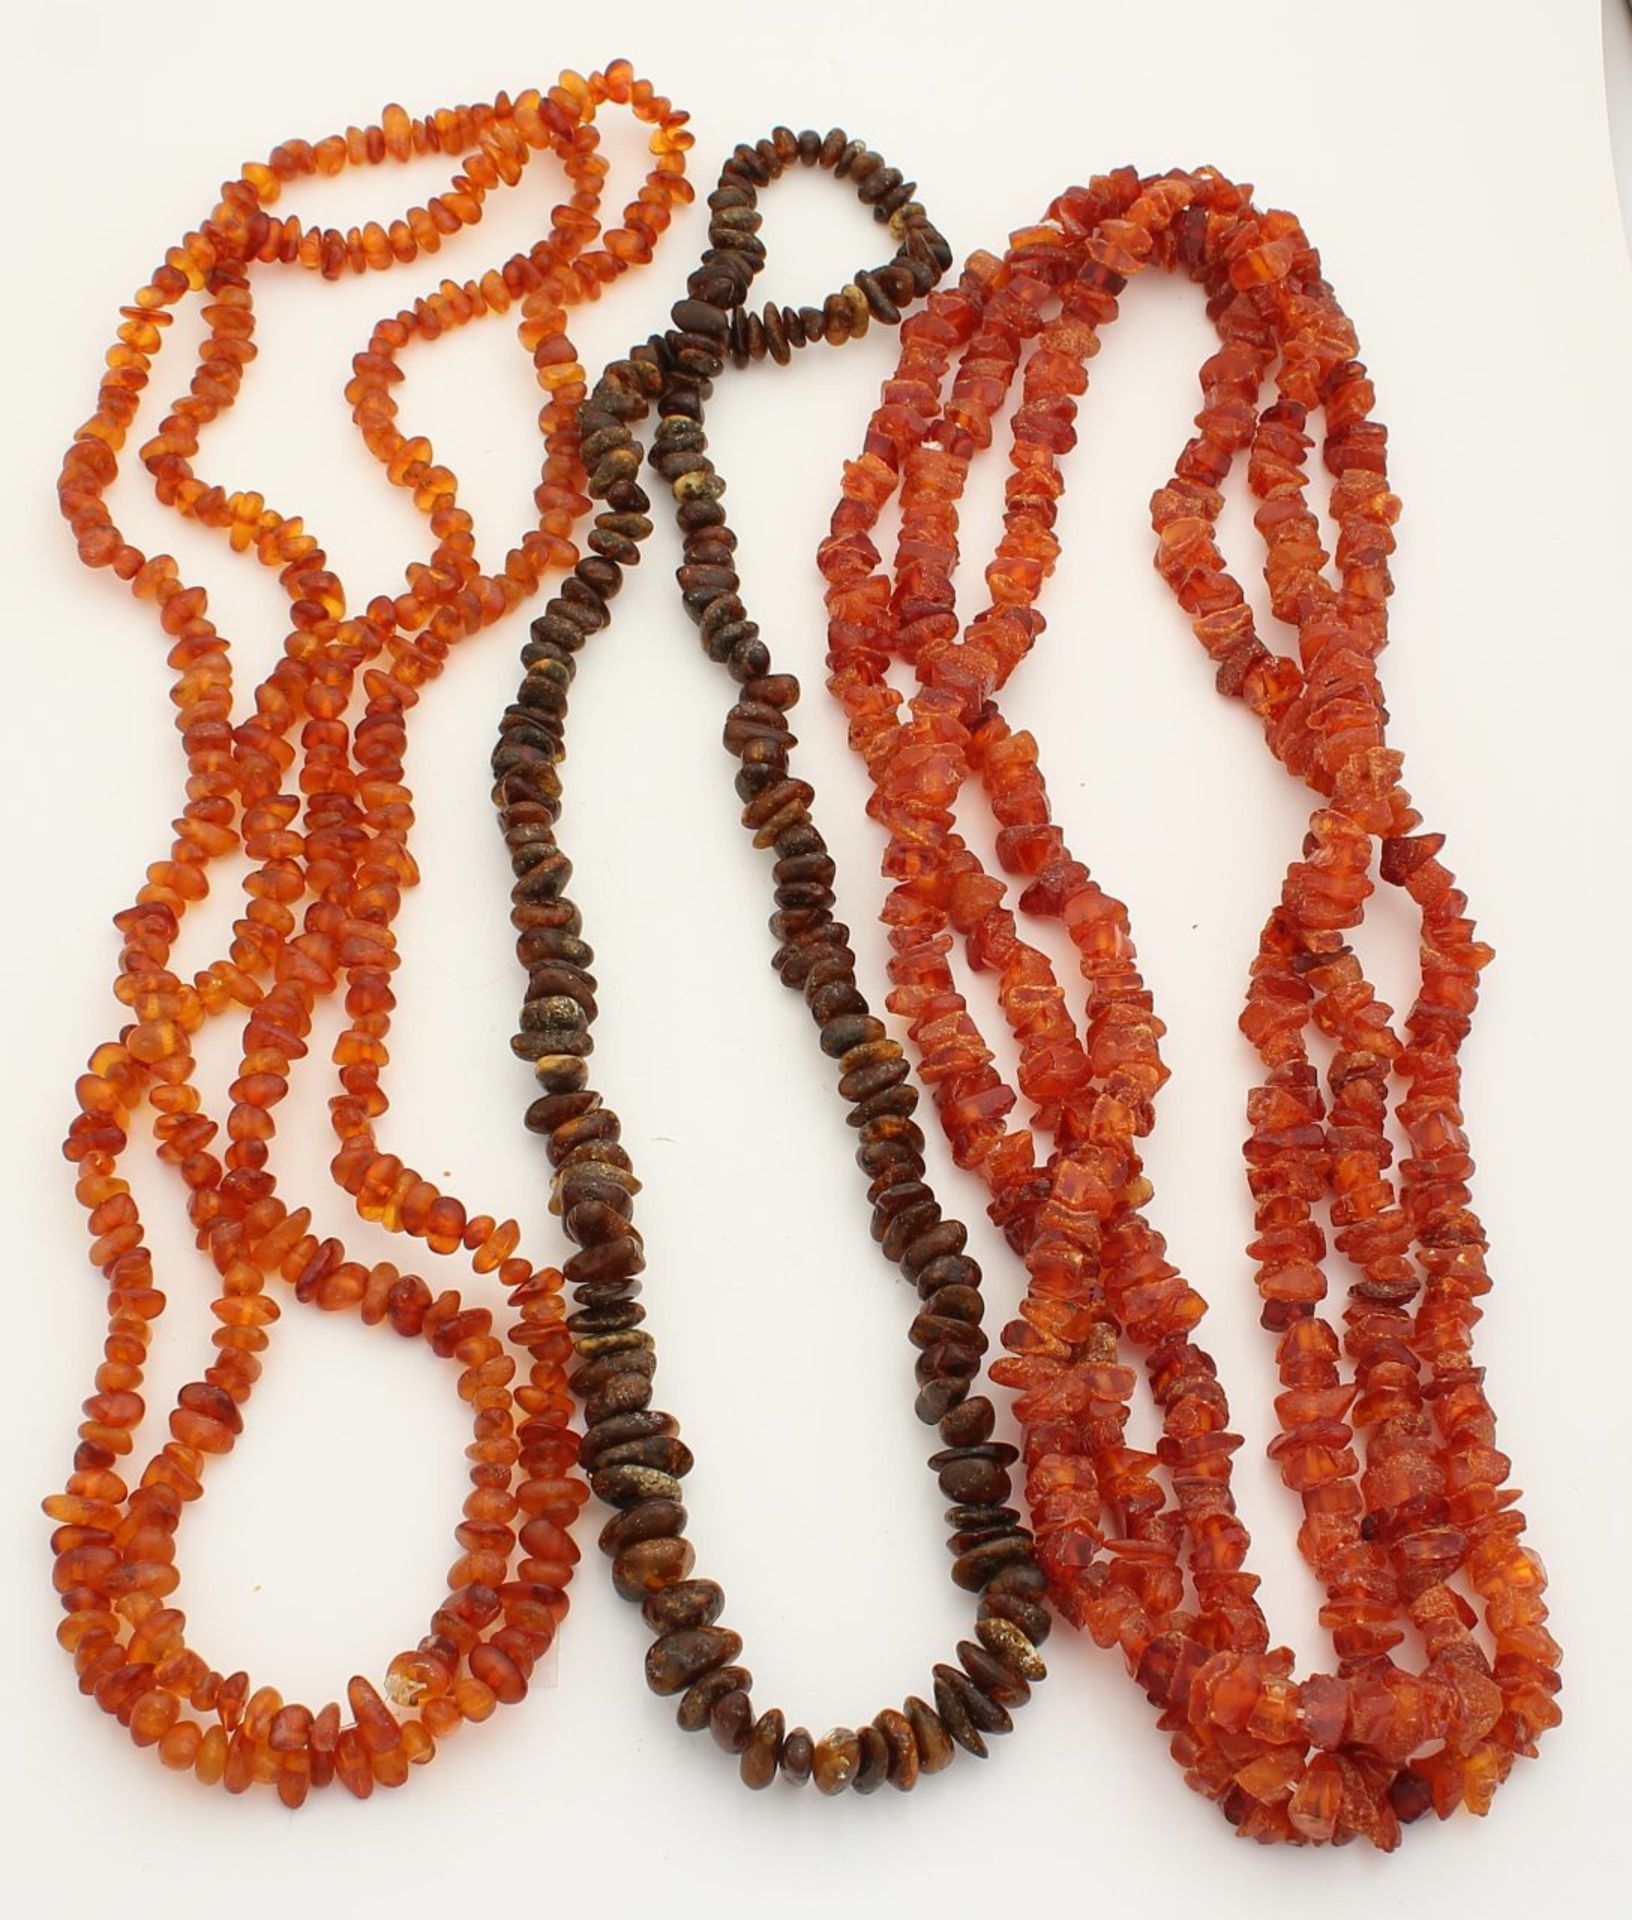 Three long cords with amber beads, raw or only tumbled. One with a dark color. Size approximately